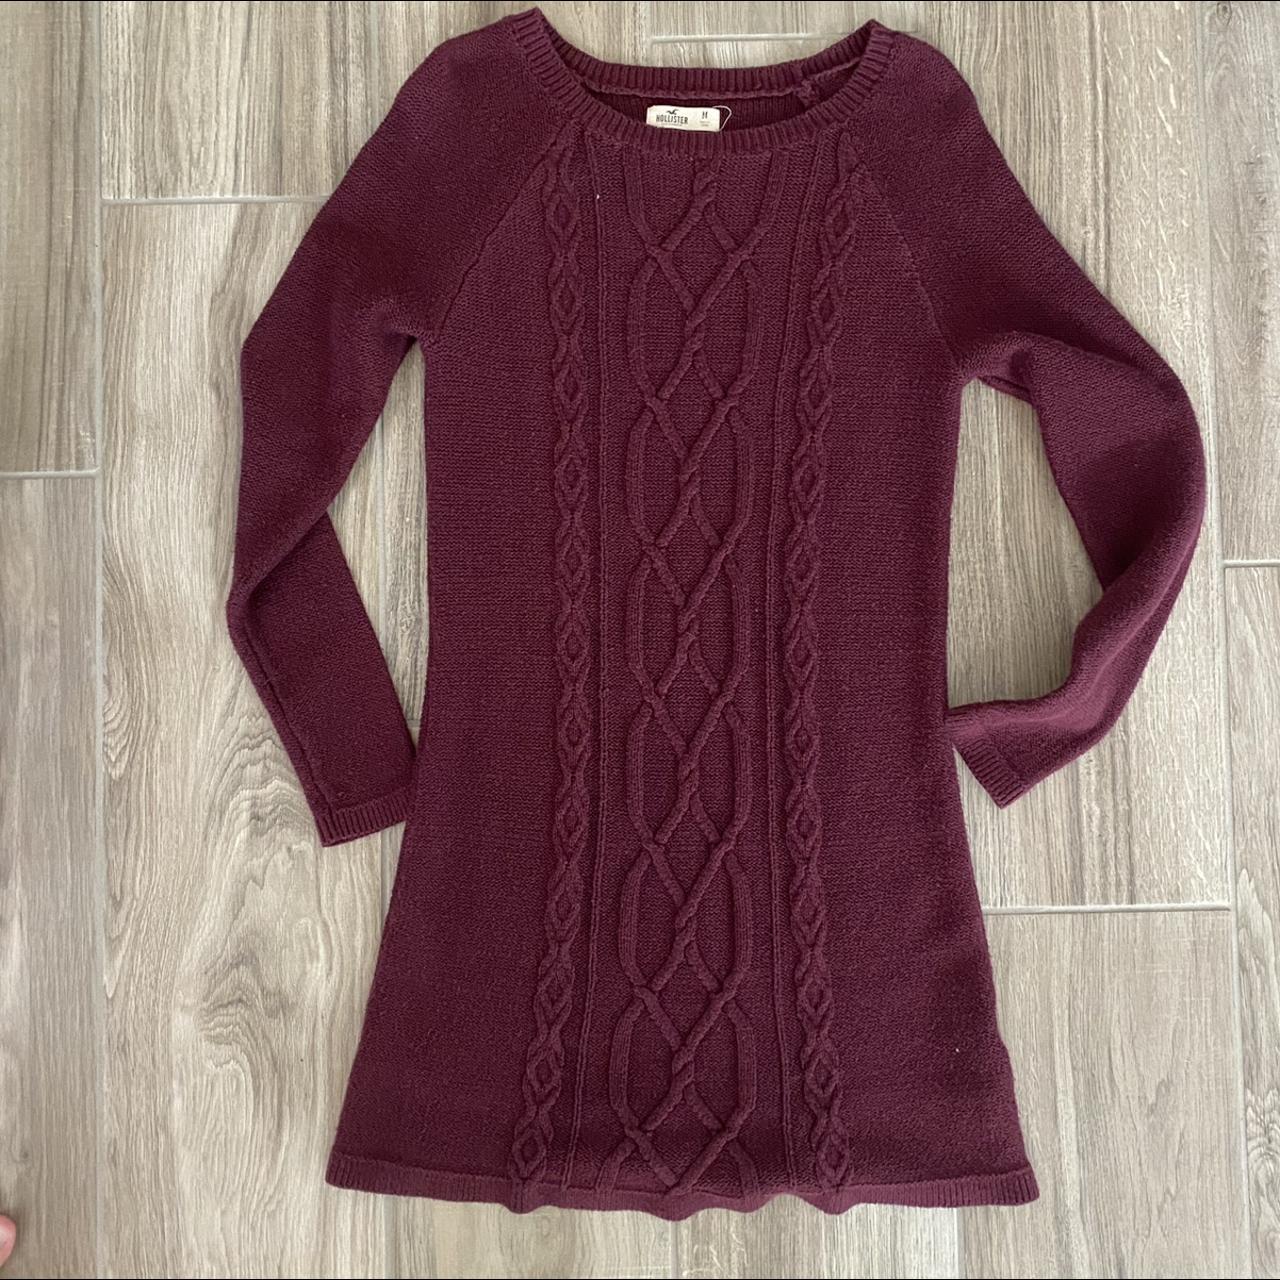 Hollister Cable Knit White Sweater Dress. This is - Depop